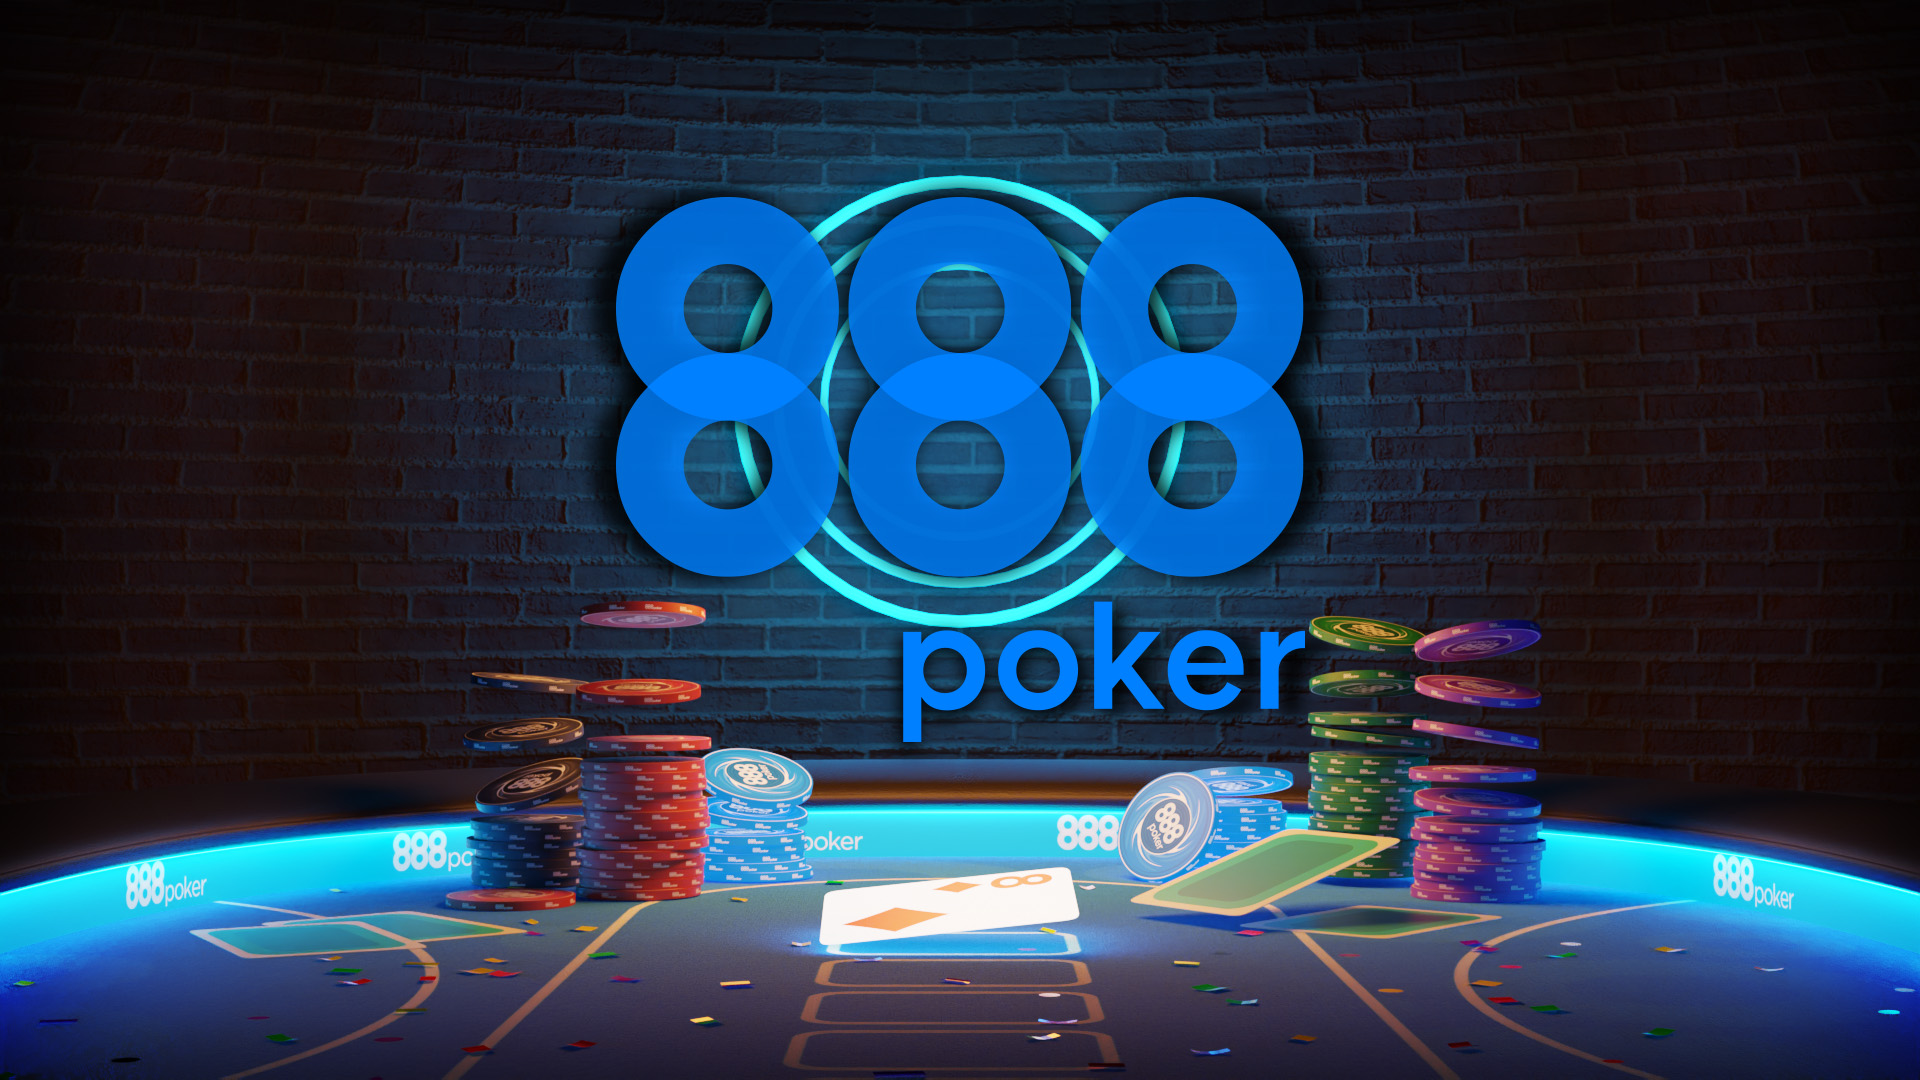 Online Poker – DosPoochies wins $11,854 at 888poker